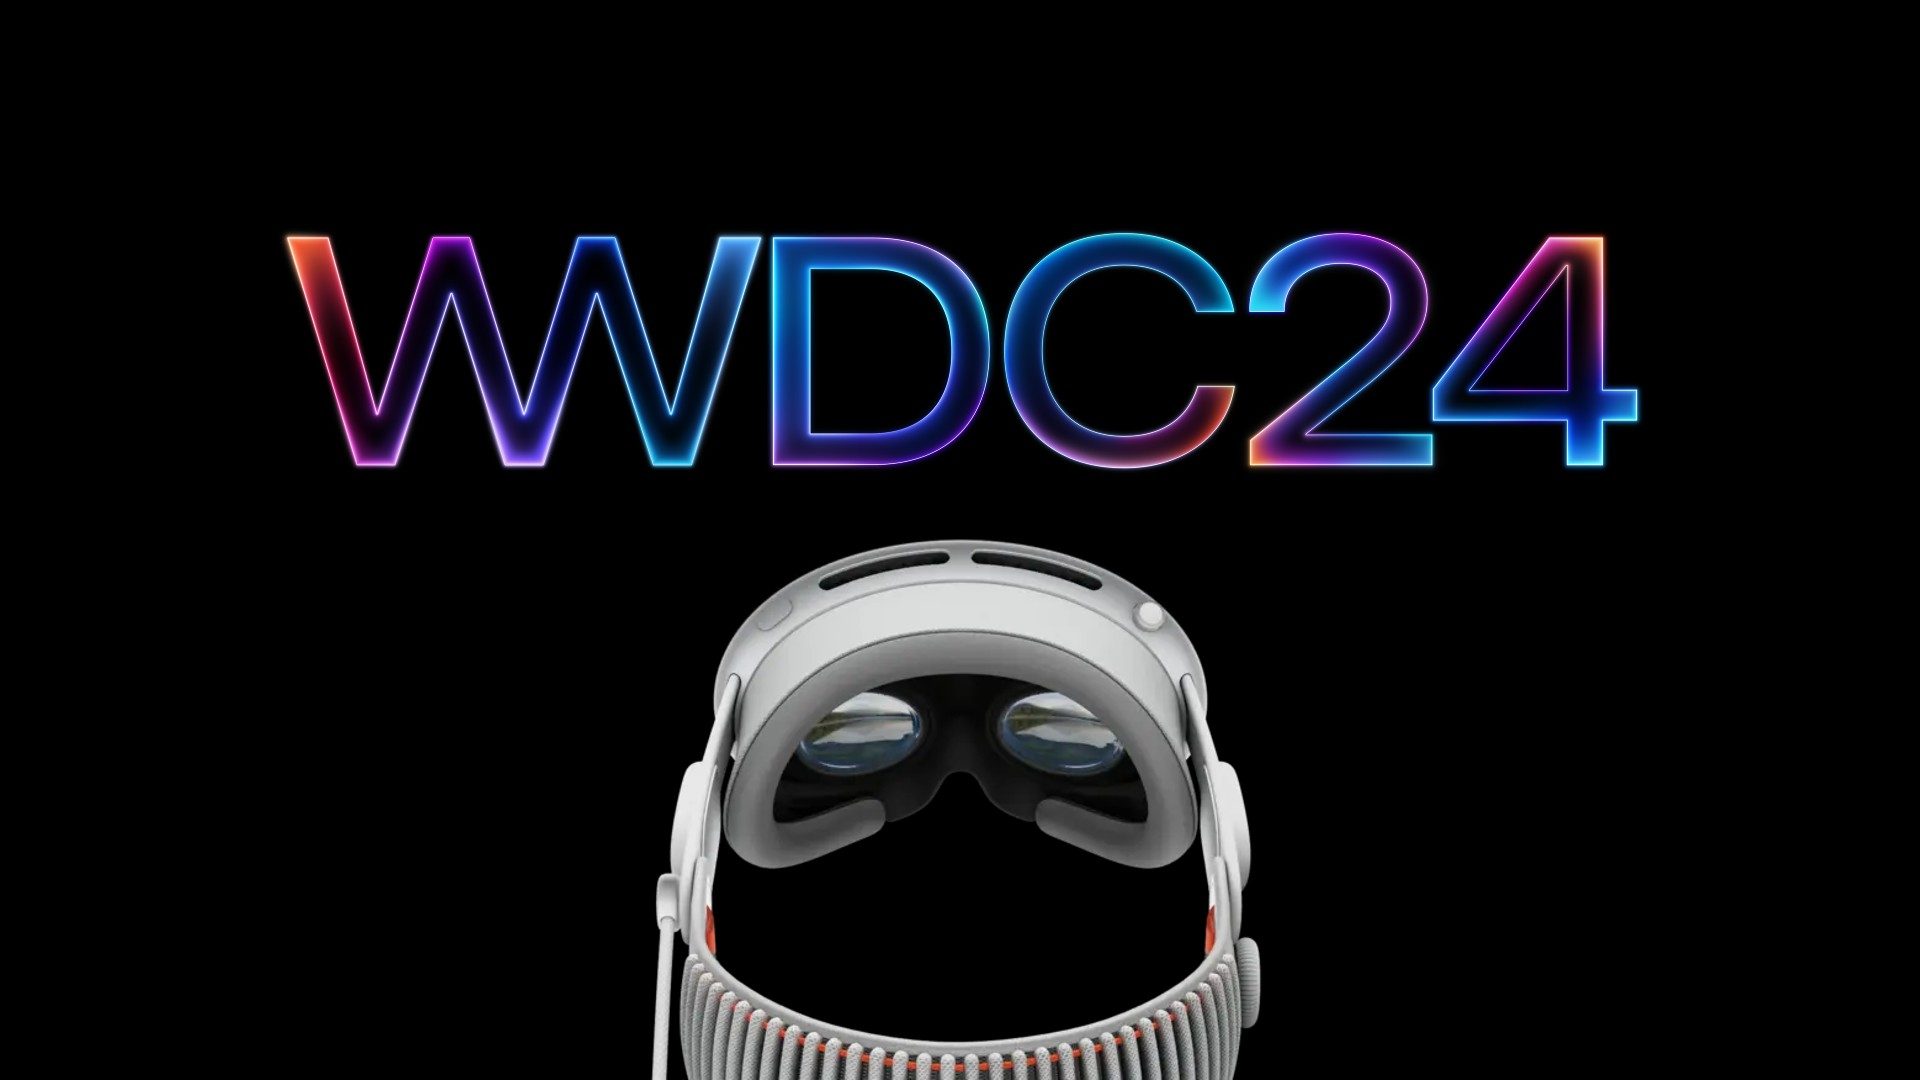 Apple Announces WWDC 2024 with Plans to Highlight "visionOS advancements"